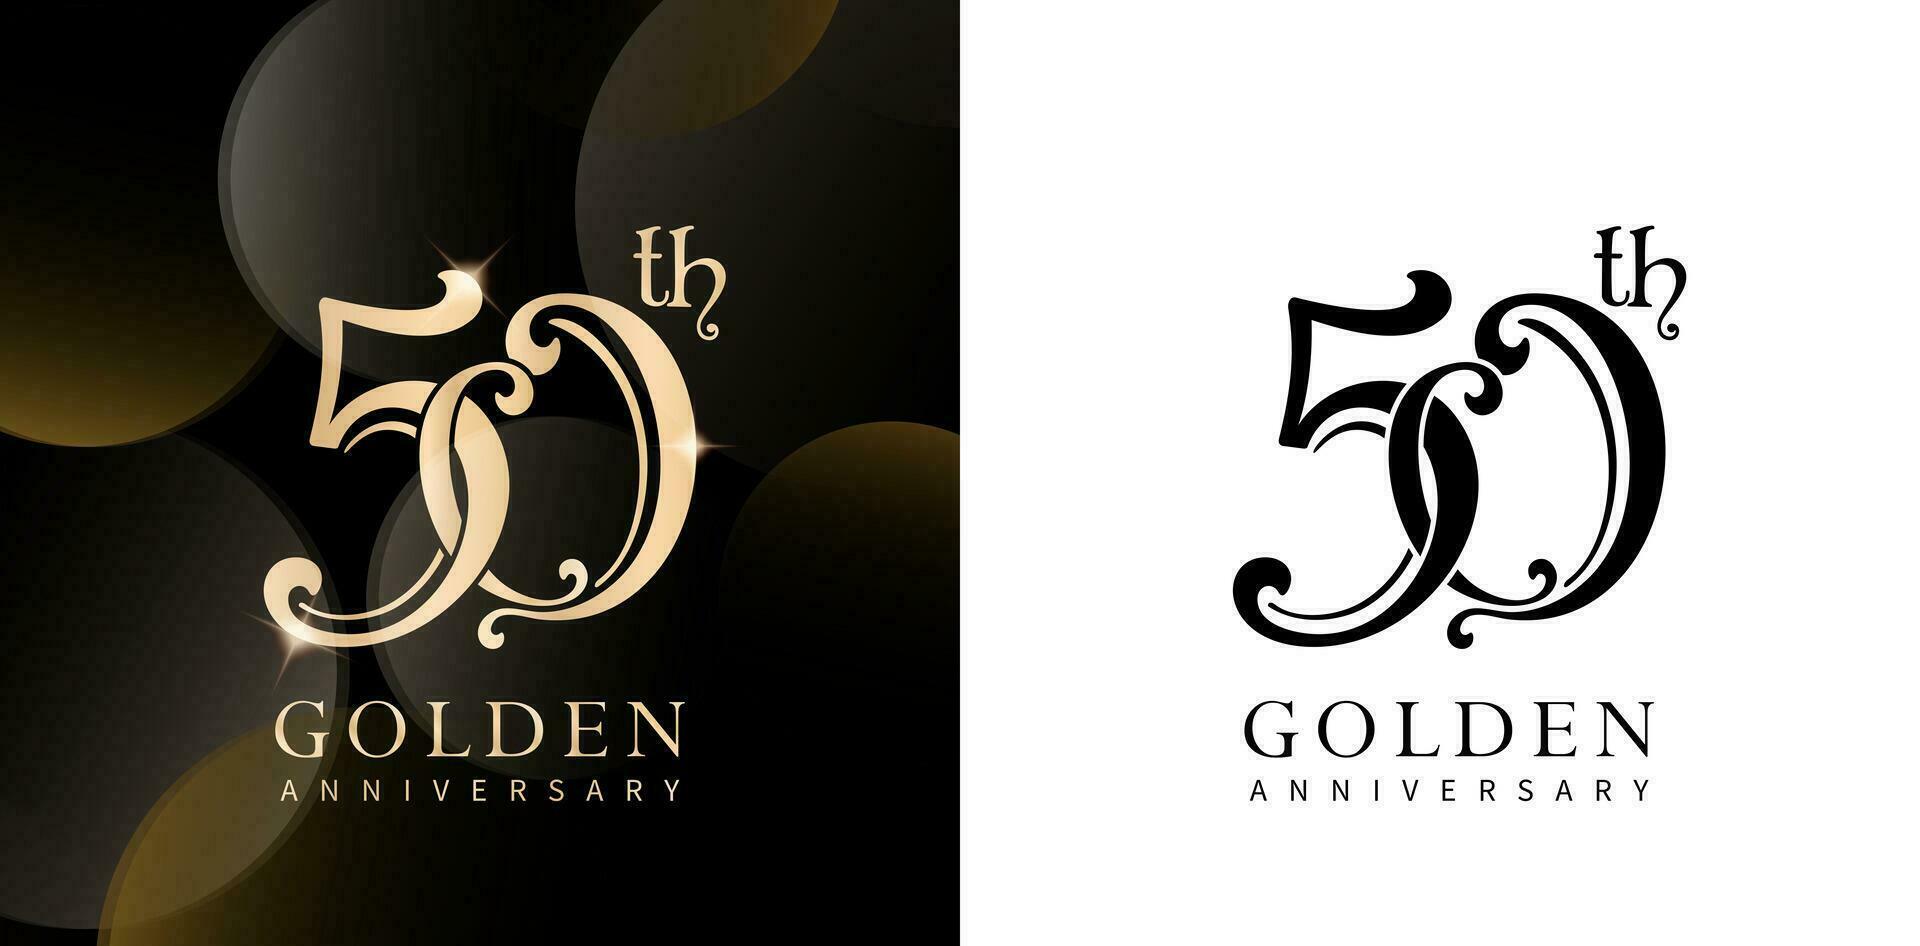 50 Years golden Anniversary Celebration Logo with Gold and Black colors isolated backgrounds for wedding invitation card, User interface and experience designs, event stationery, Branding and identity vector